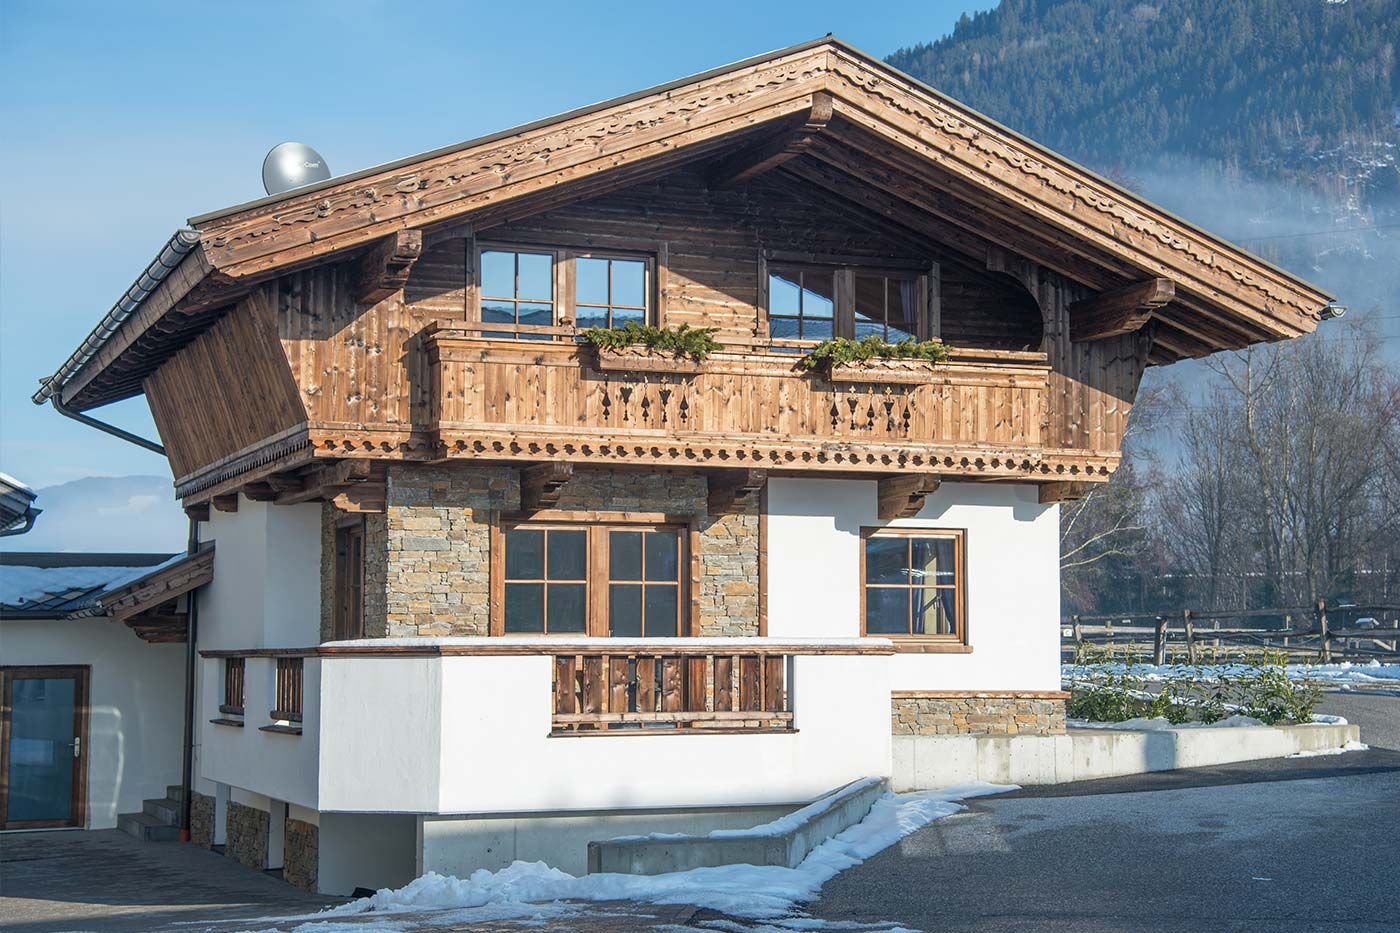 New chalet in Tyrolean style